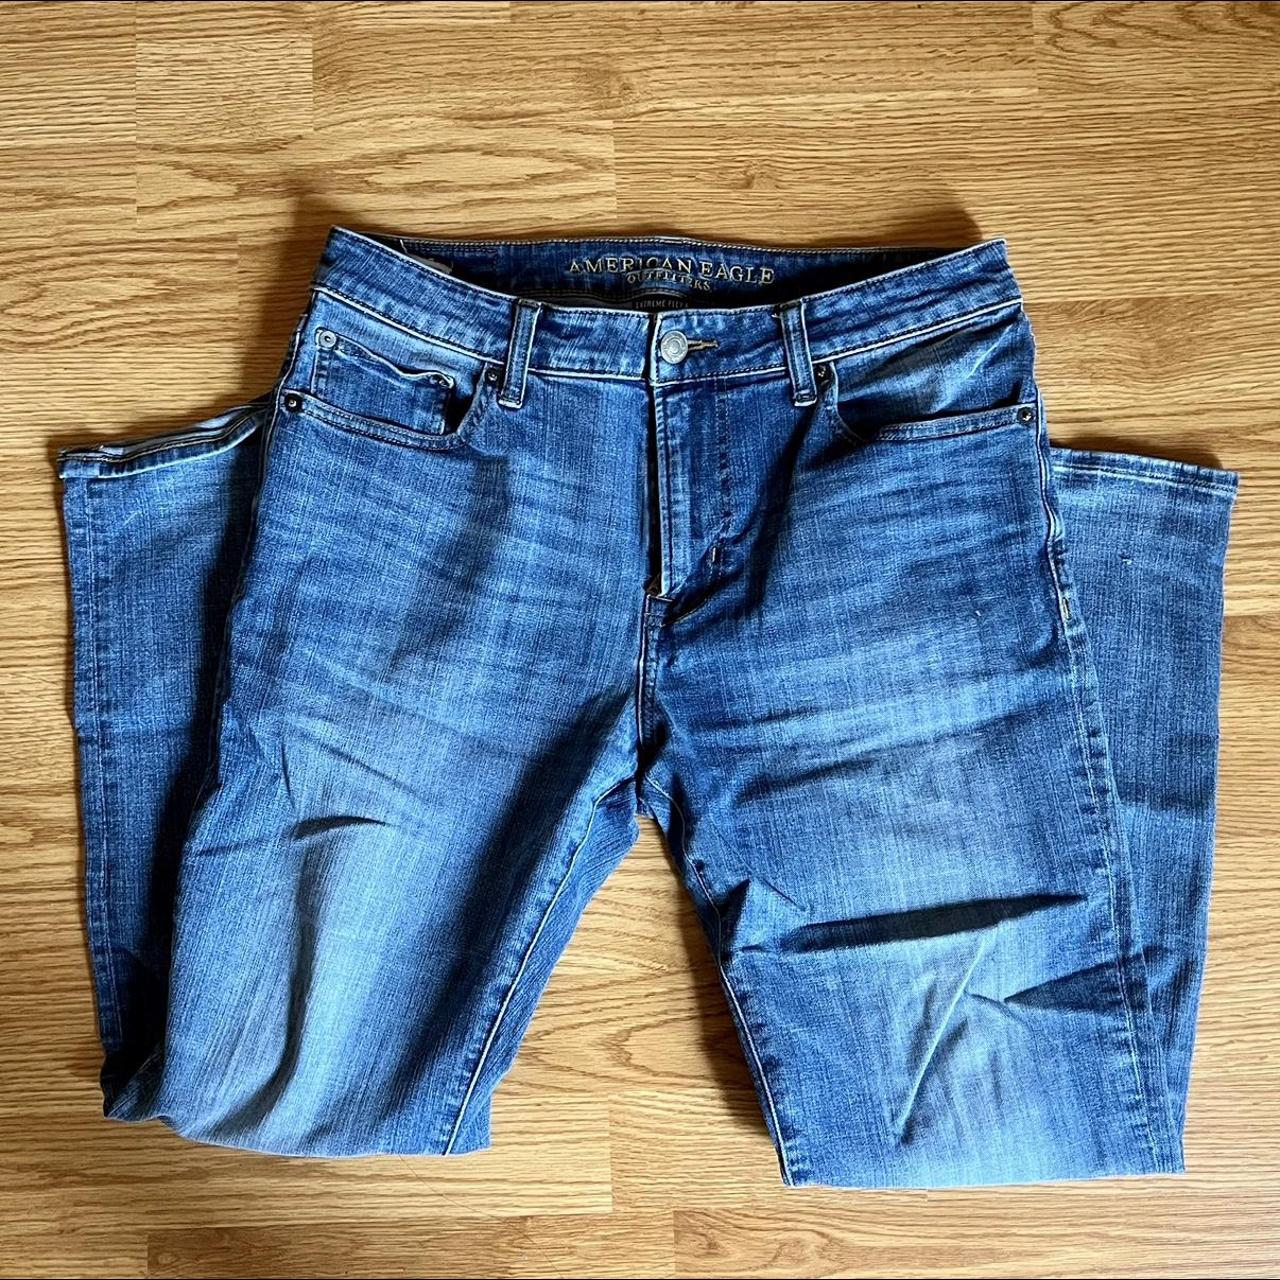 American Eagle Outfitters Men's Jeans | Depop